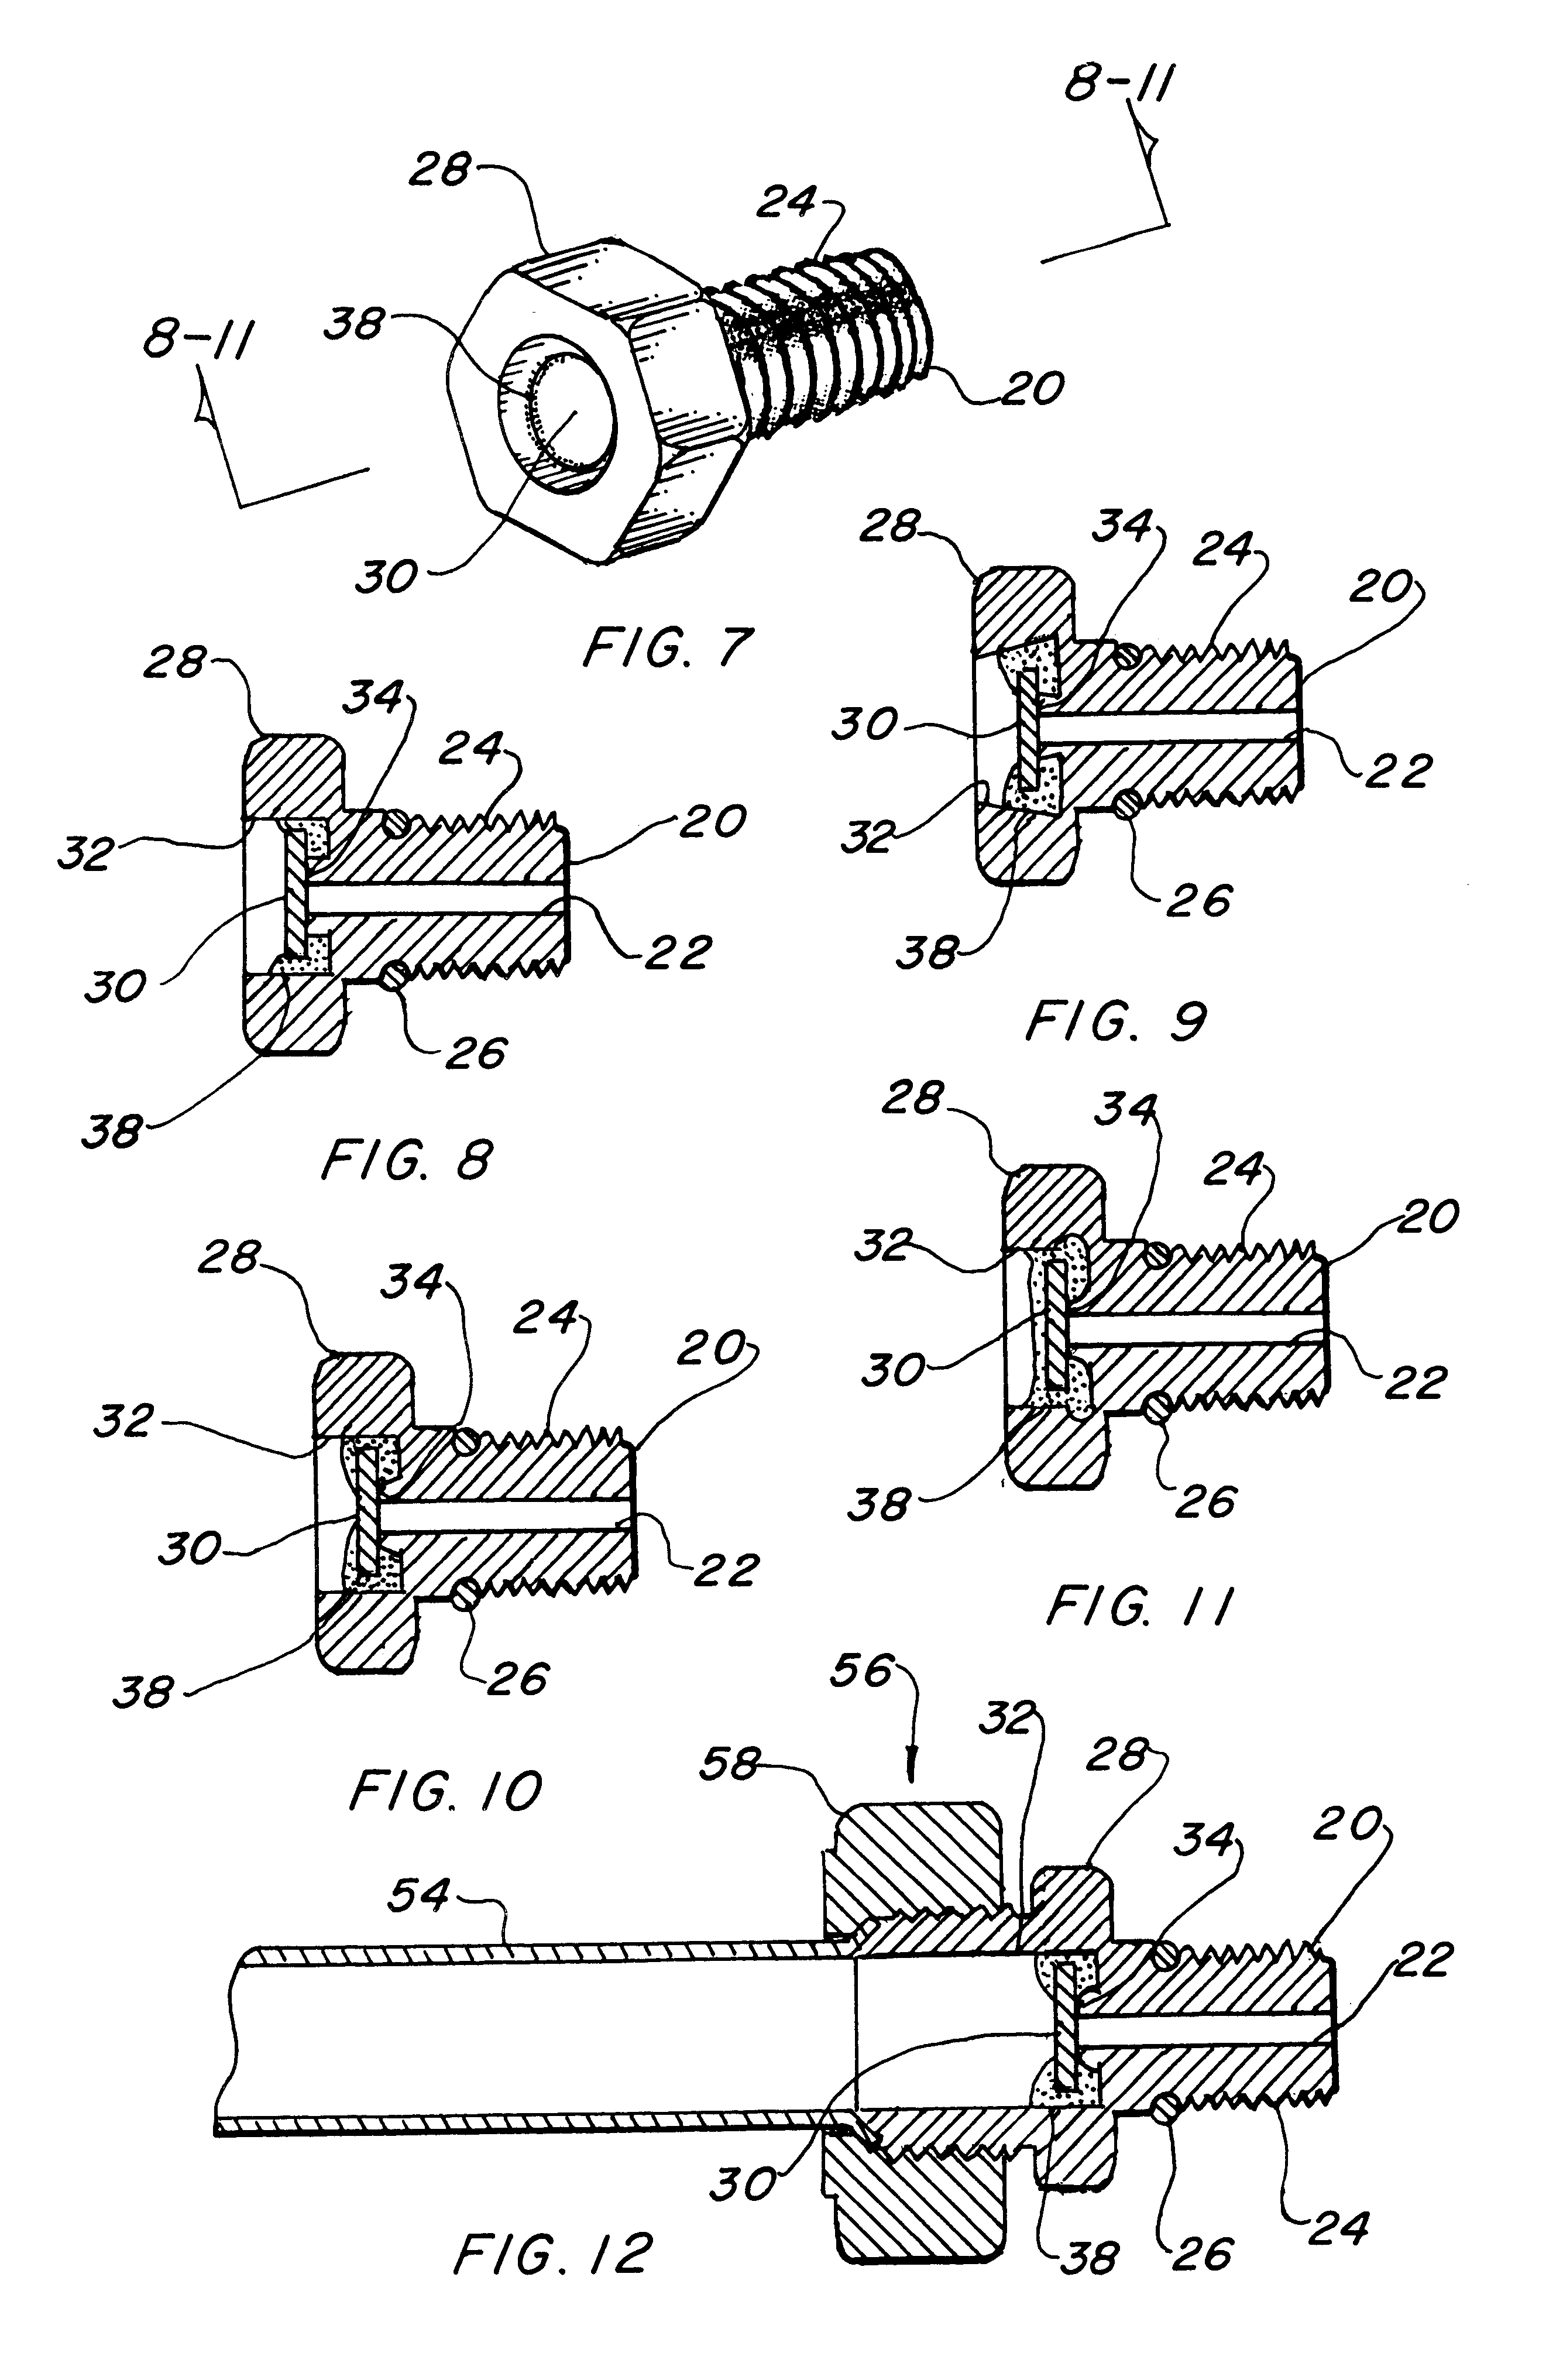 Thermal-pressure relief device